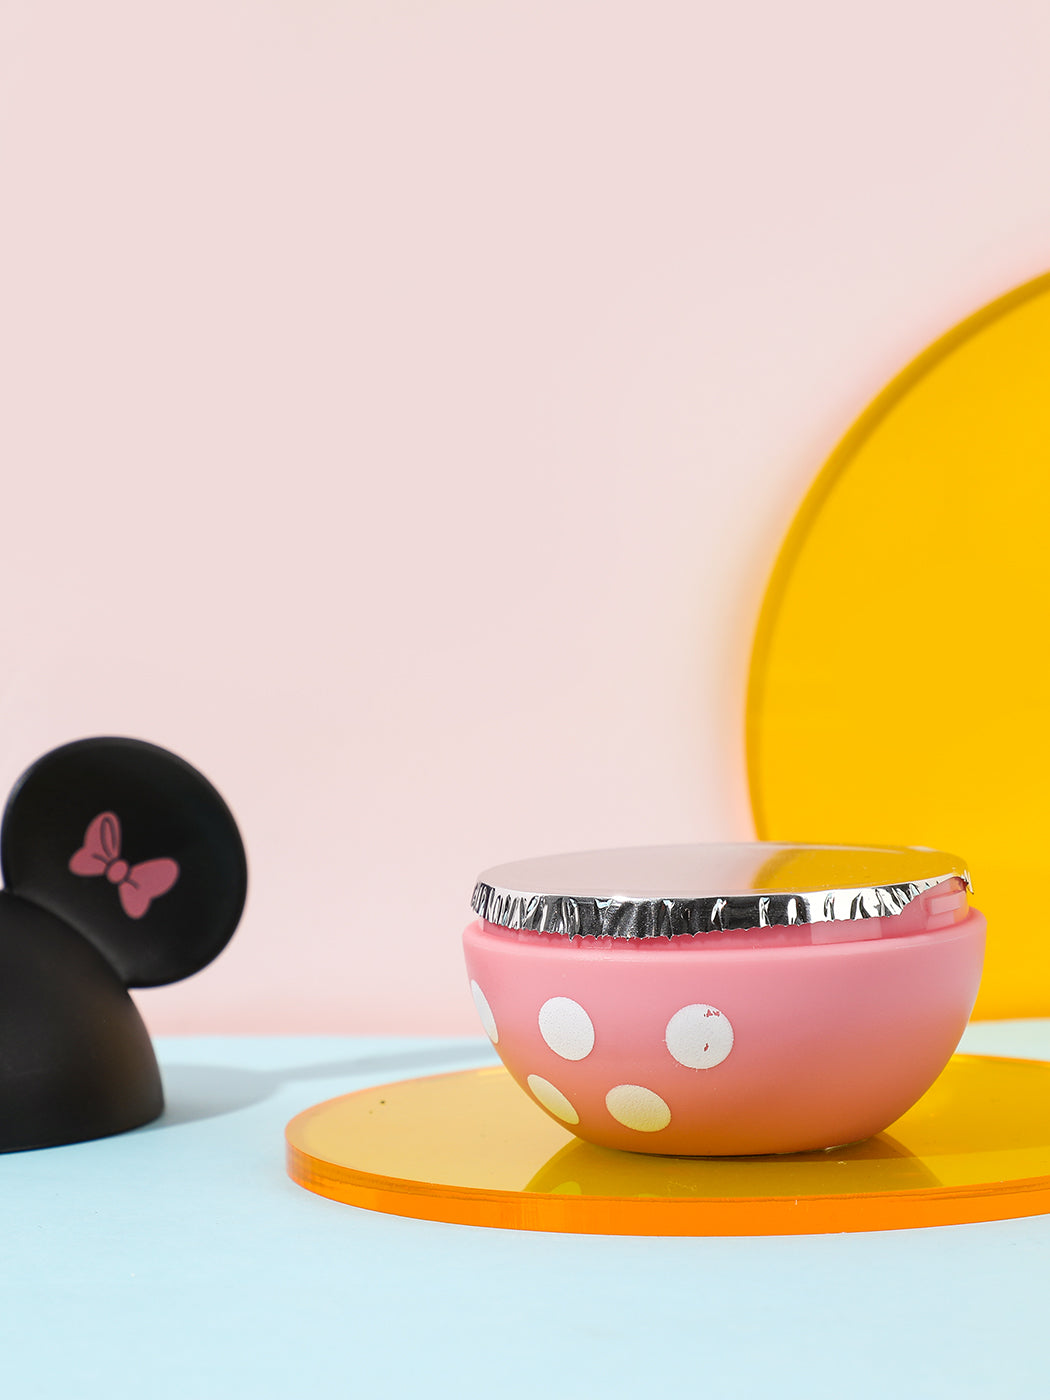 MINISO MICKEY MOUSE COLLECTION BLACK GILDING SCENTED CREAM (PINK LICHEE) 2008448010108 DEODORANT/DESICCANT